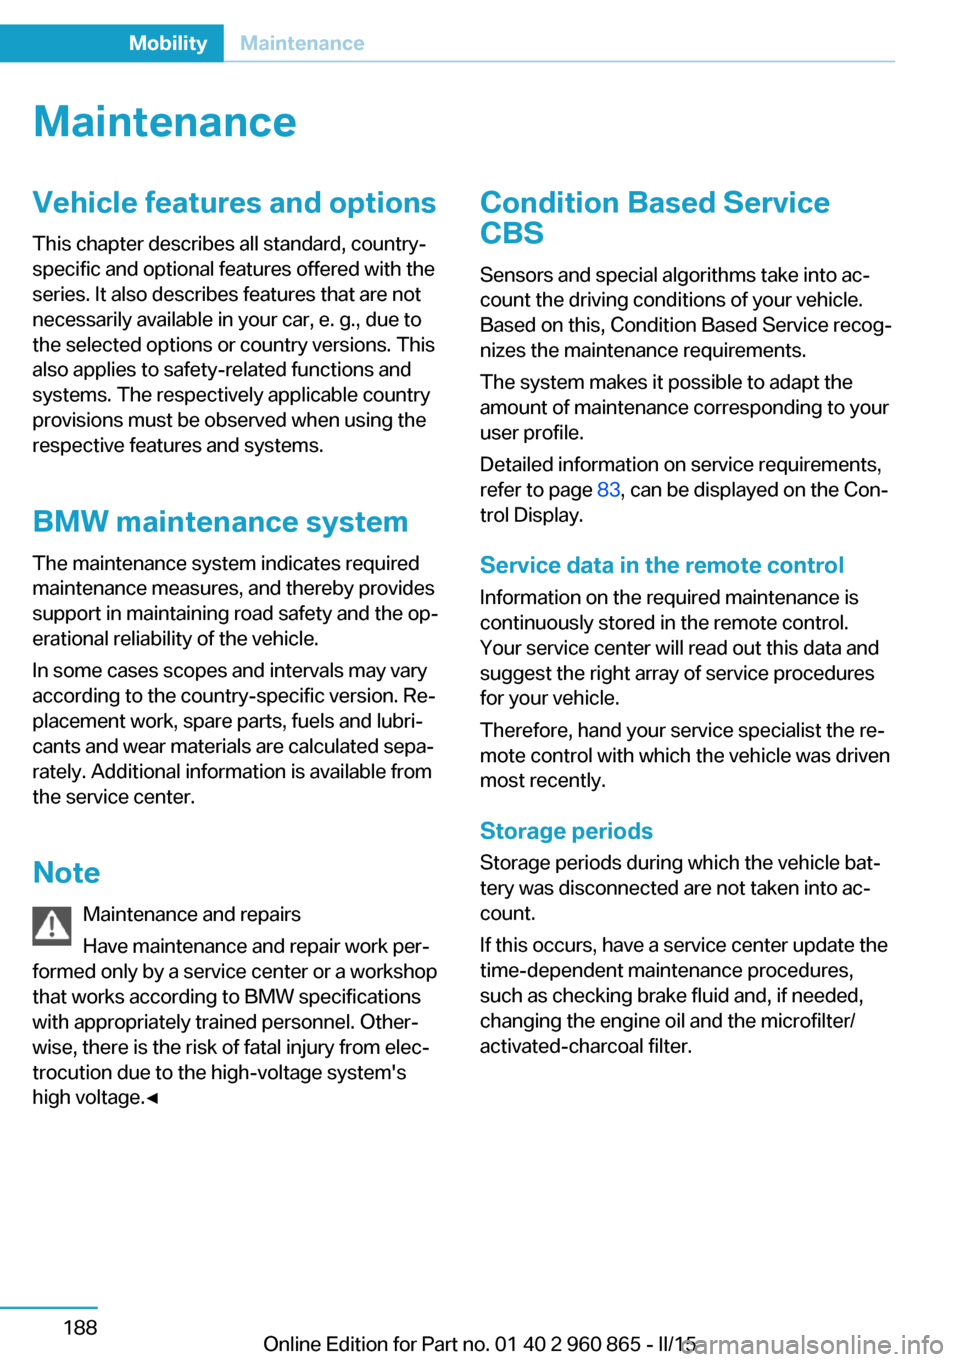 BMW I3 2015 I01 Owners Guide MaintenanceVehicle features and options
This chapter describes all standard, country-
specific and optional features offered with the
series. It also describes features that are not
necessarily availa